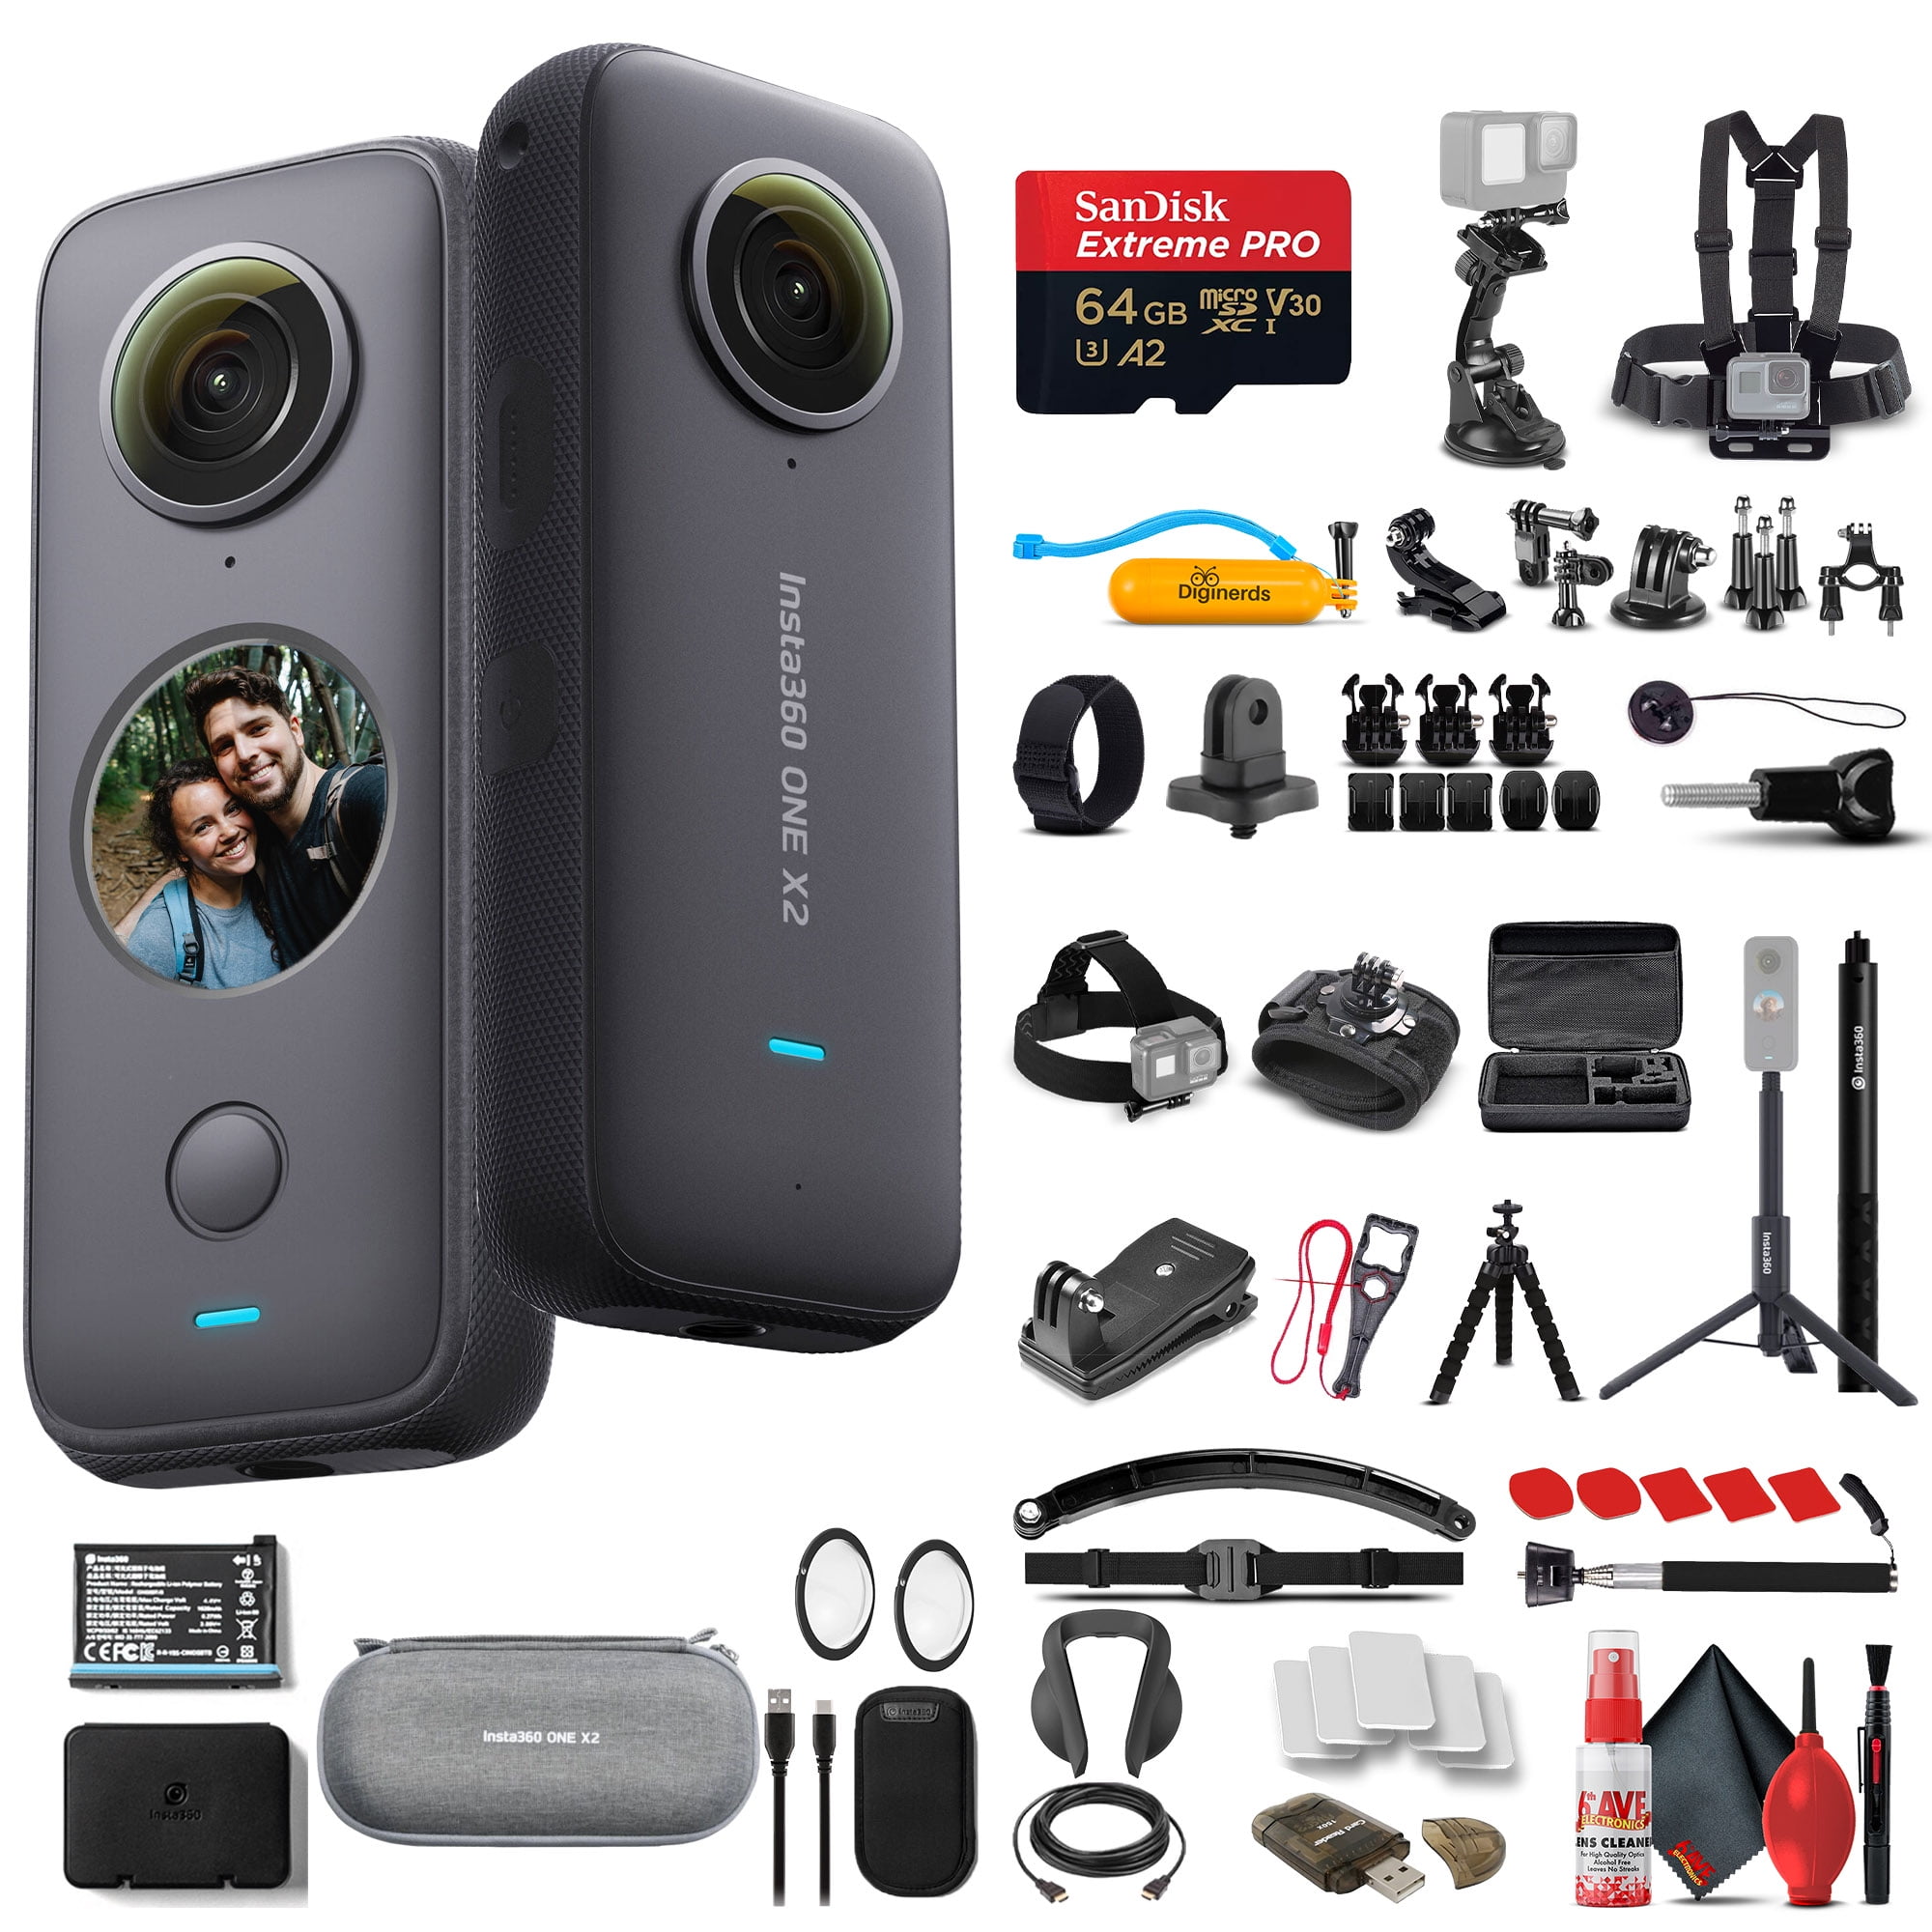 Touch 5.7K, Screen, Webcam, Action + 64GB + X2 Insta360 Live Voice Lens Card Stick Camera, 360 ONE Kit Selfie Streaming, Control + Stabilization, Waterproof More + Guards + Case Accessory + 50-in-1